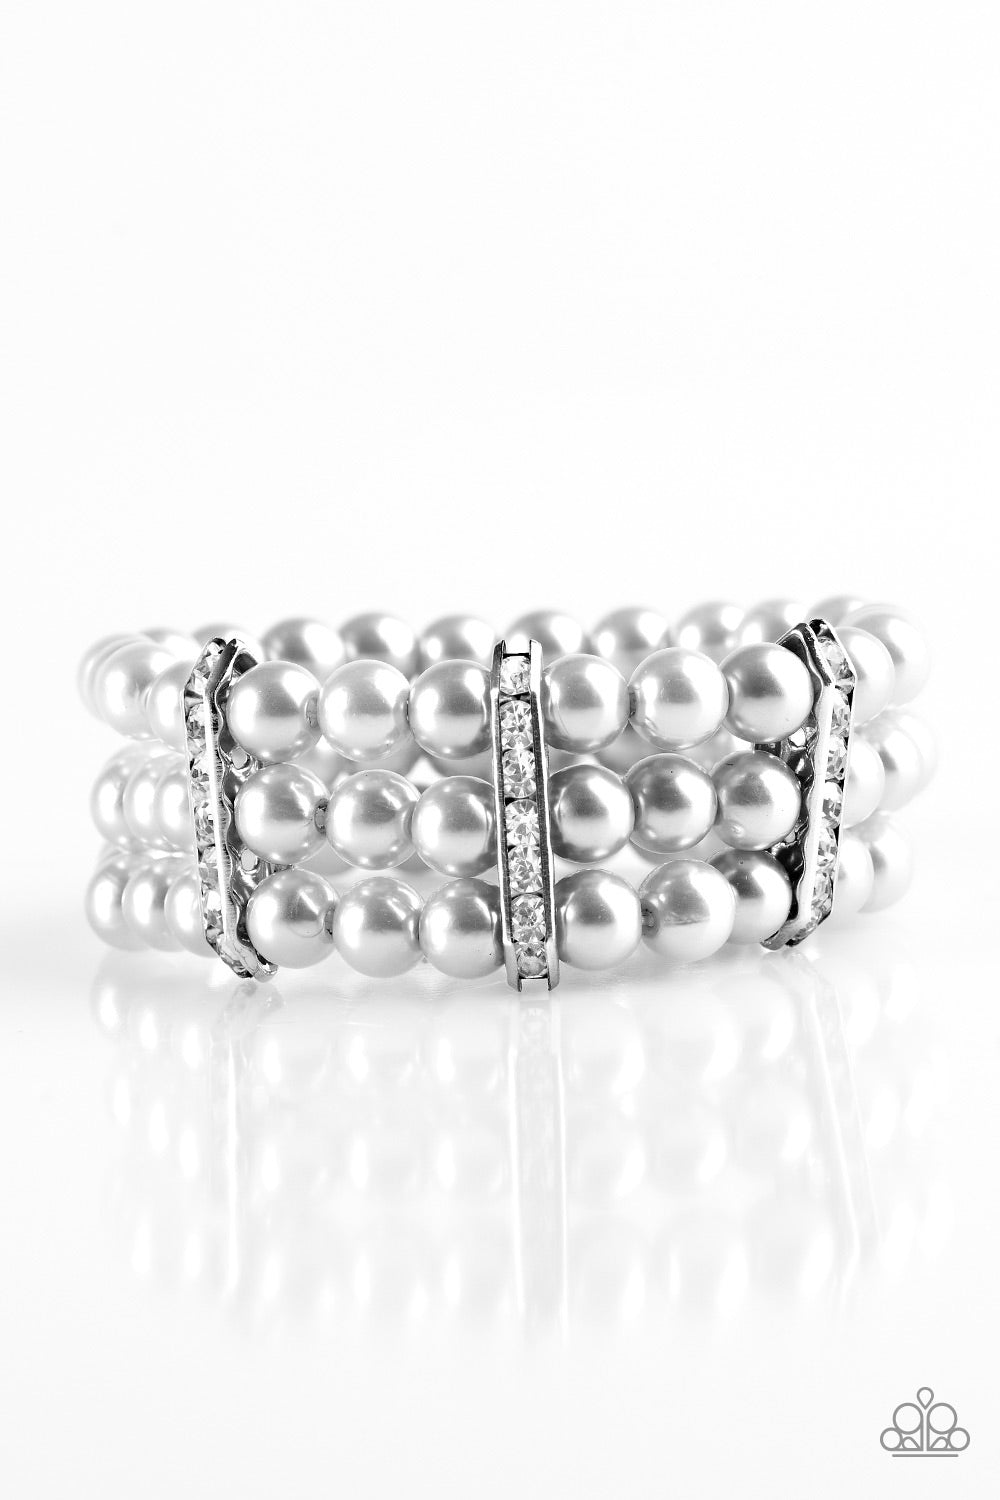 Put On Your GLAM Face Silver-Bracelet